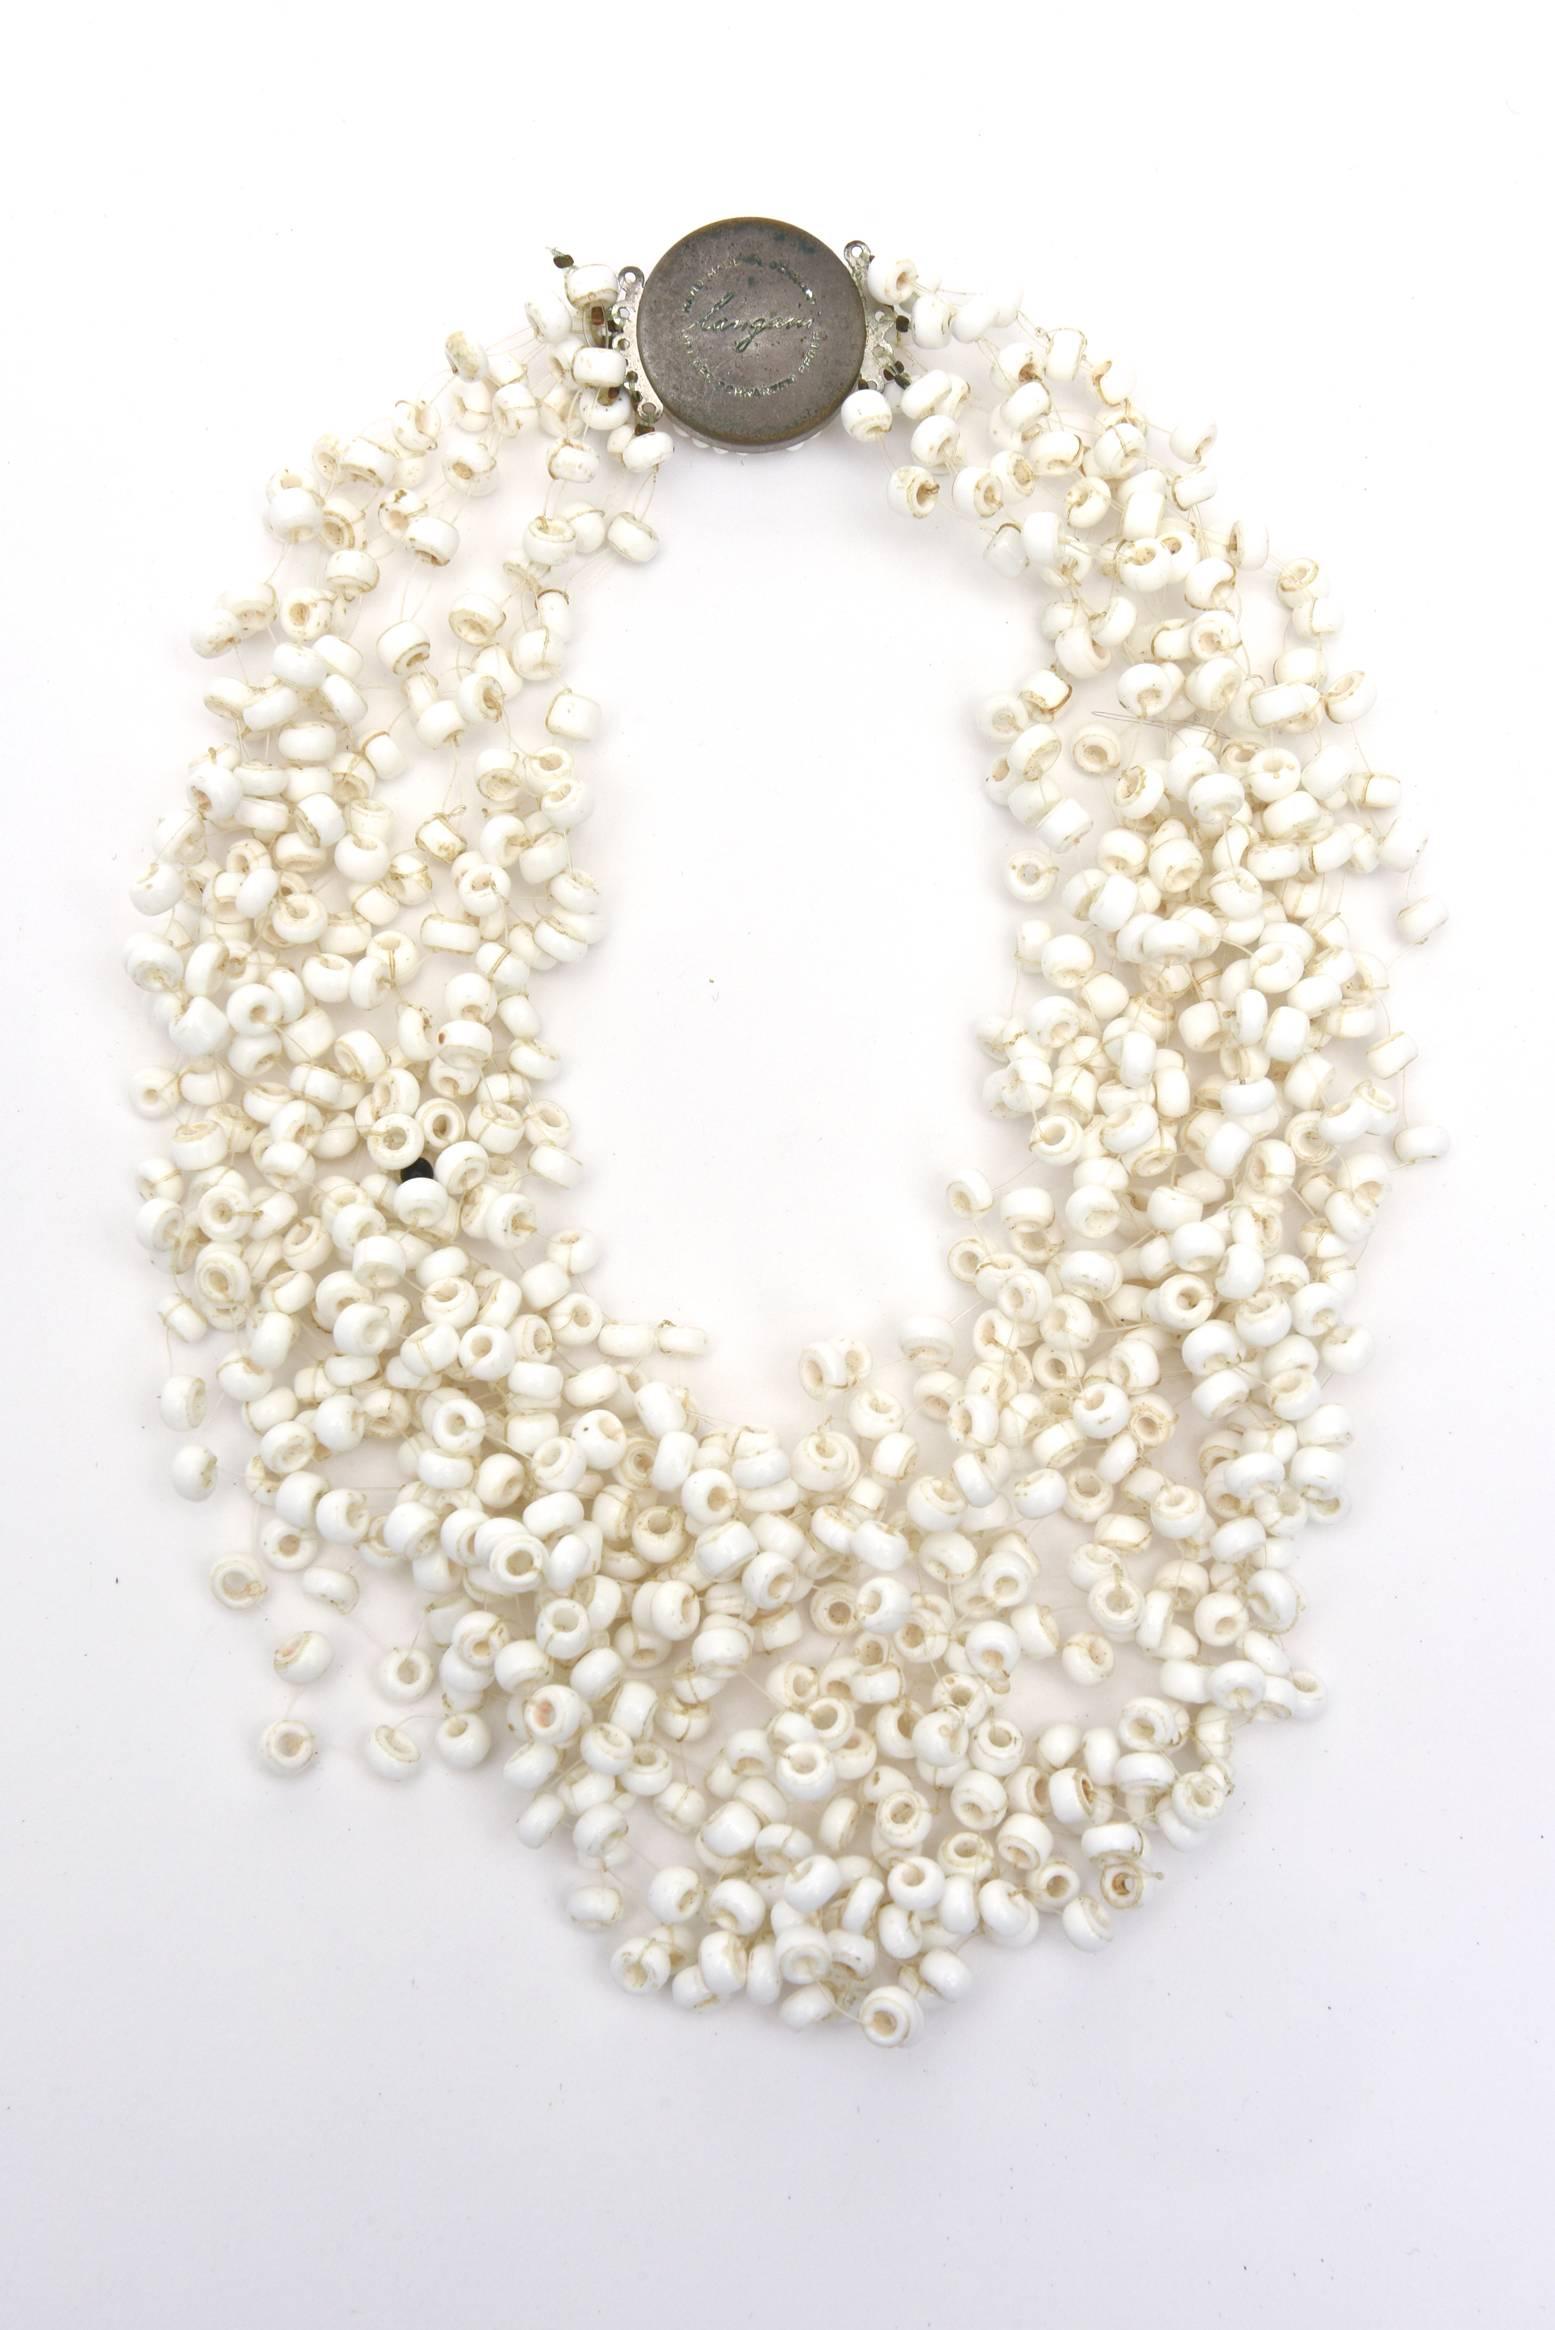 This wonderful and collectable vintage white multi strand signed Langani necklace designed by Anna Lang of Germany has a clean, airy and great sculptural presence. Almost as if it is floating on the neck. It is perfect now for sp for all seasons and